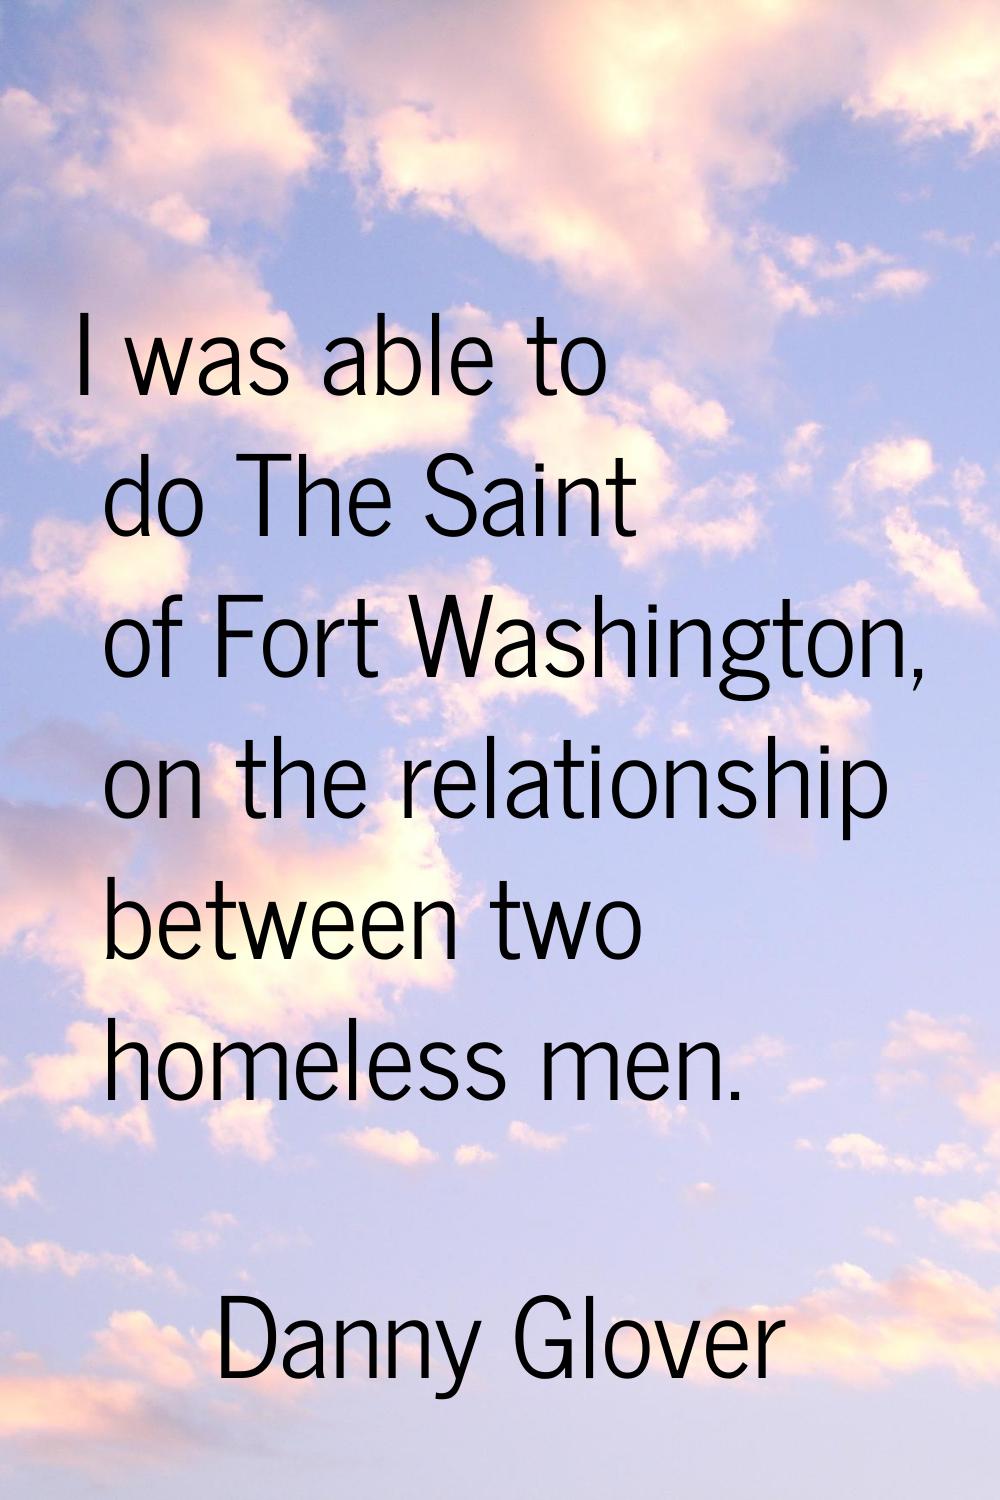 I was able to do The Saint of Fort Washington, on the relationship between two homeless men.